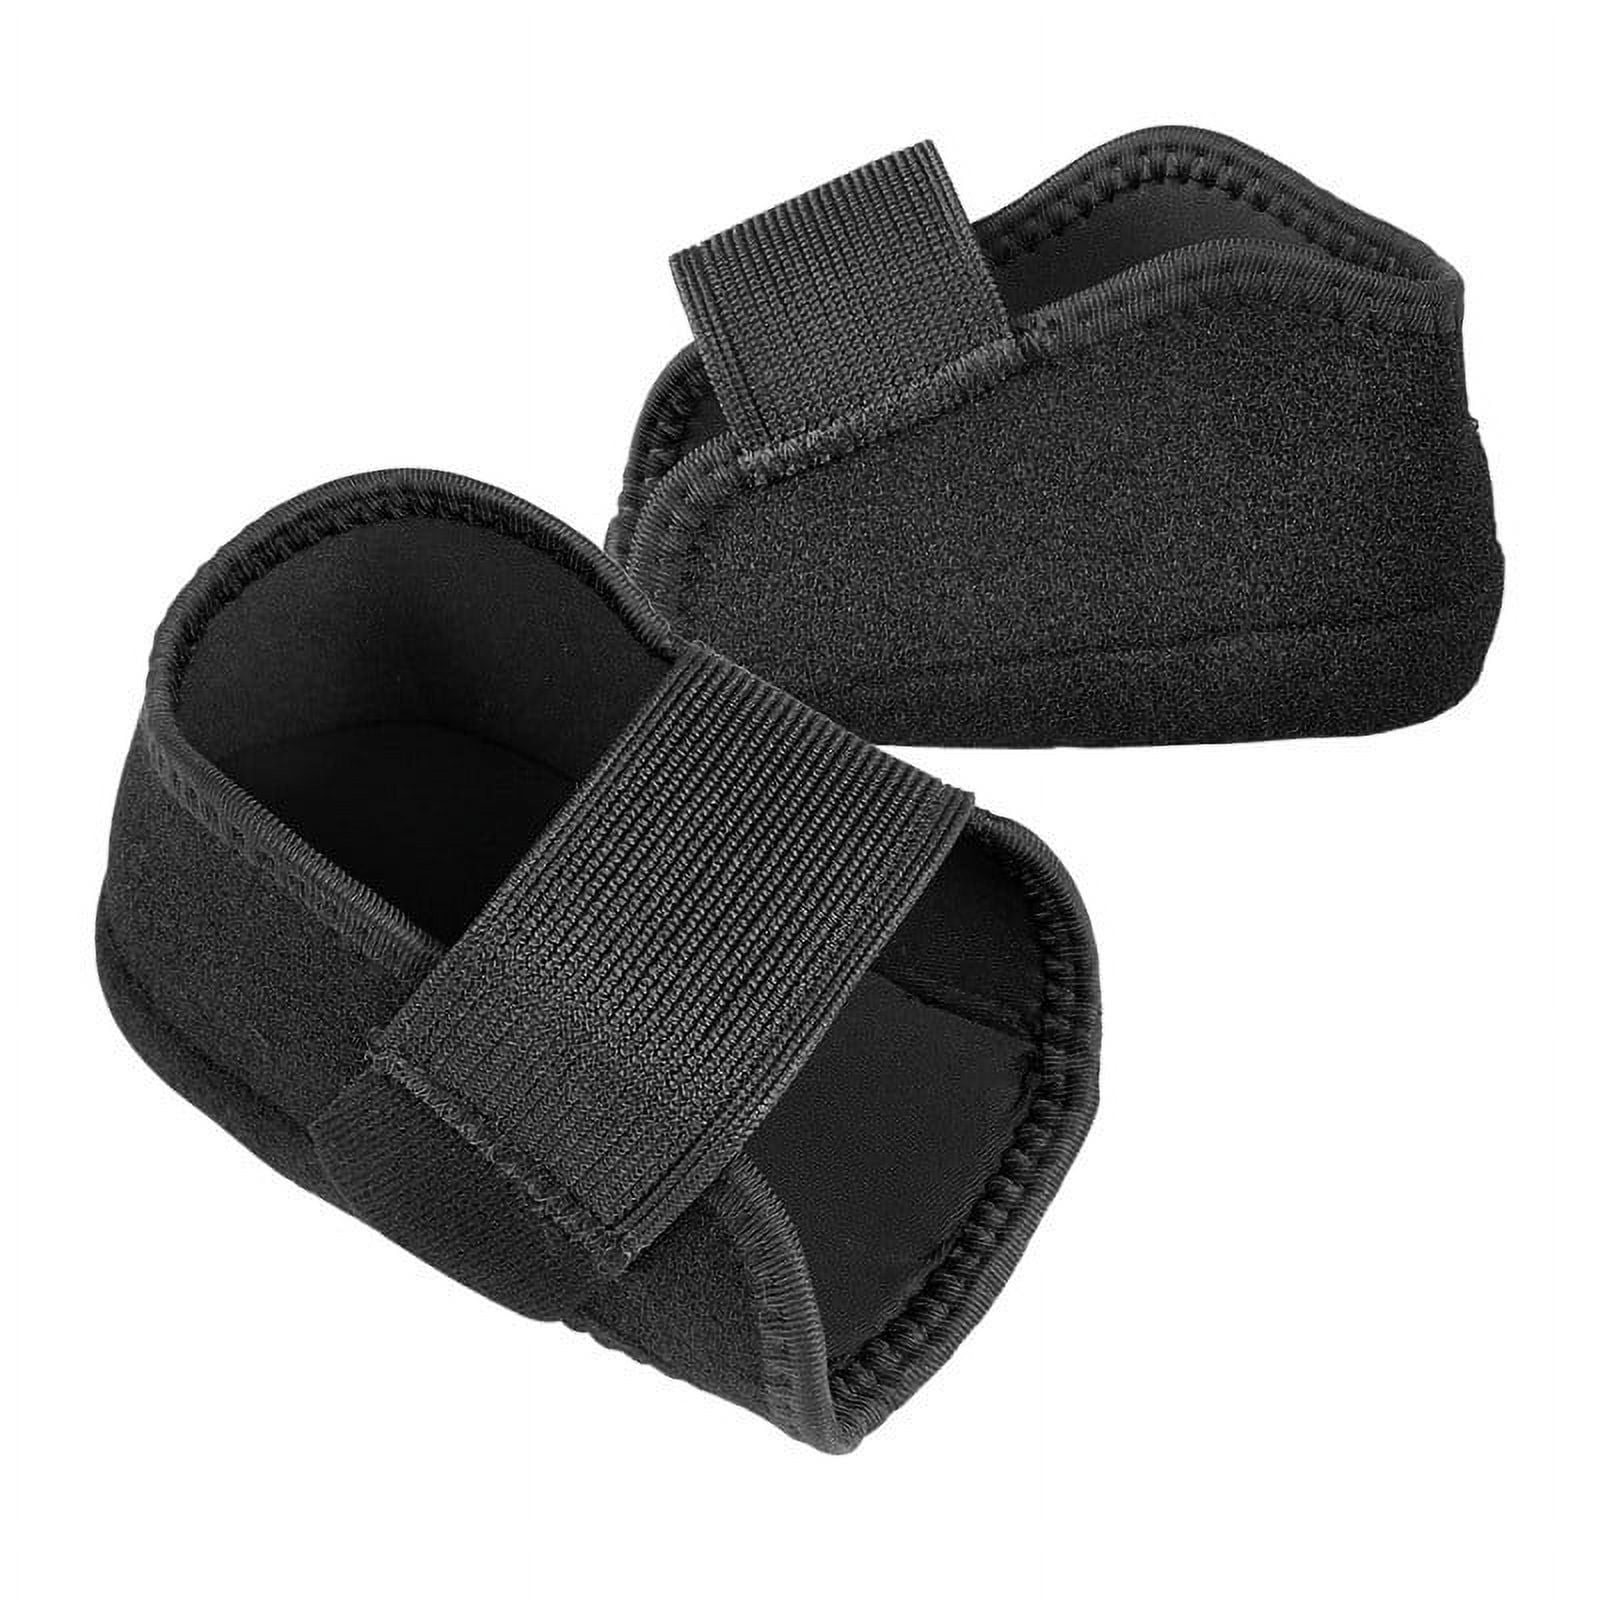 2/4Pairs Insoles Patch Heel Pads for Sport Running Shoes Adjustable Size  Antiwear Feet Pad Cushion Insert Insole Heel Protector Back Sticker -  Walmart.com